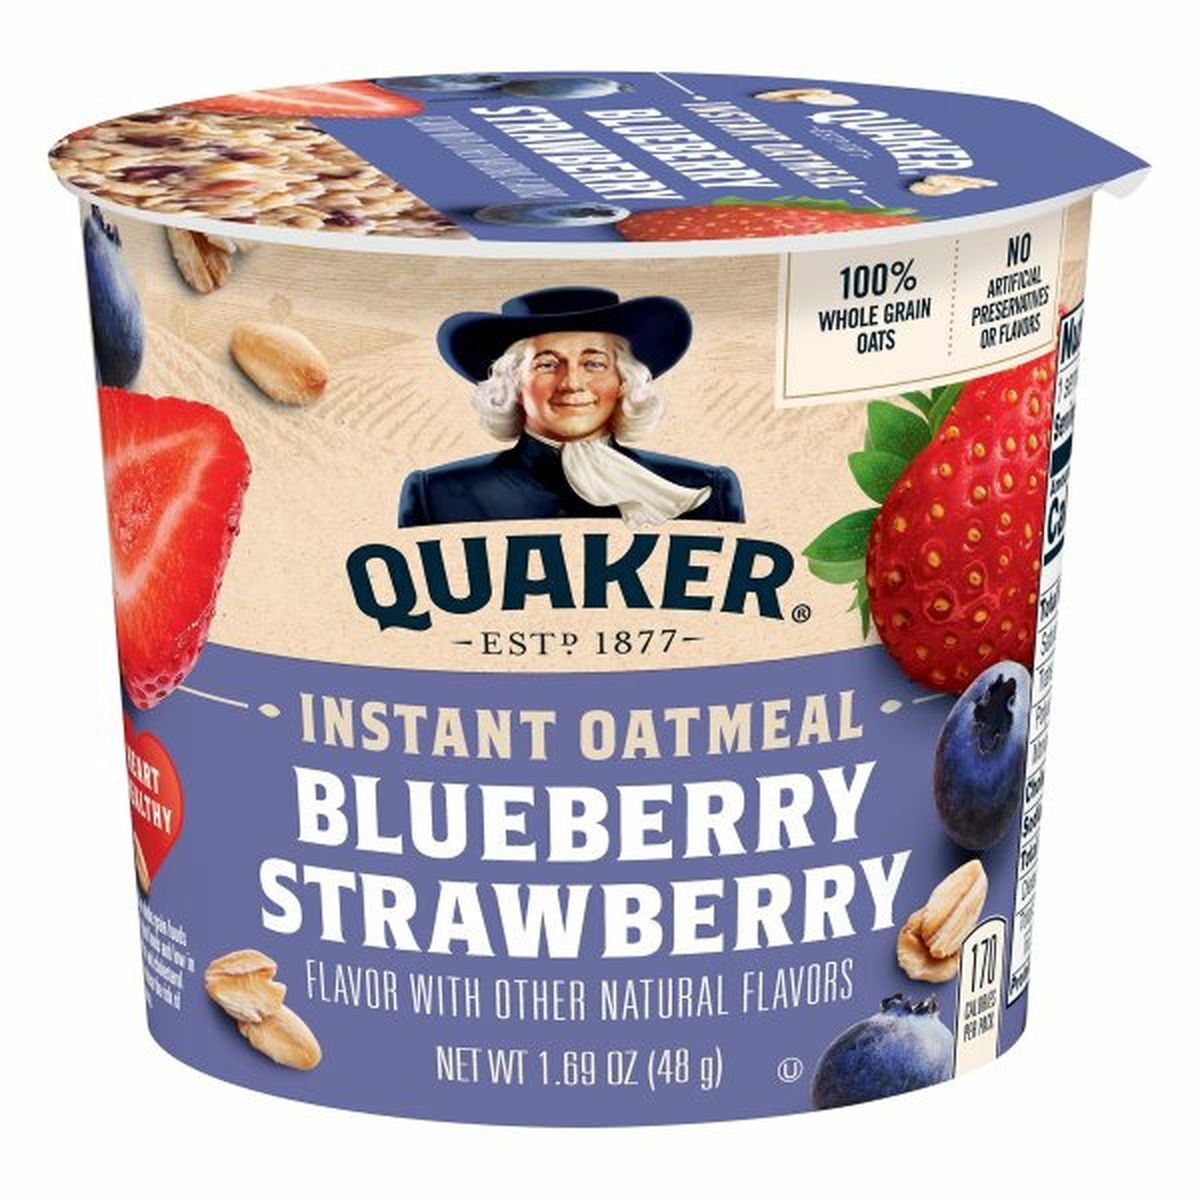 Calories in Quaker Instant Oatmeal, Blueberry Strawberry